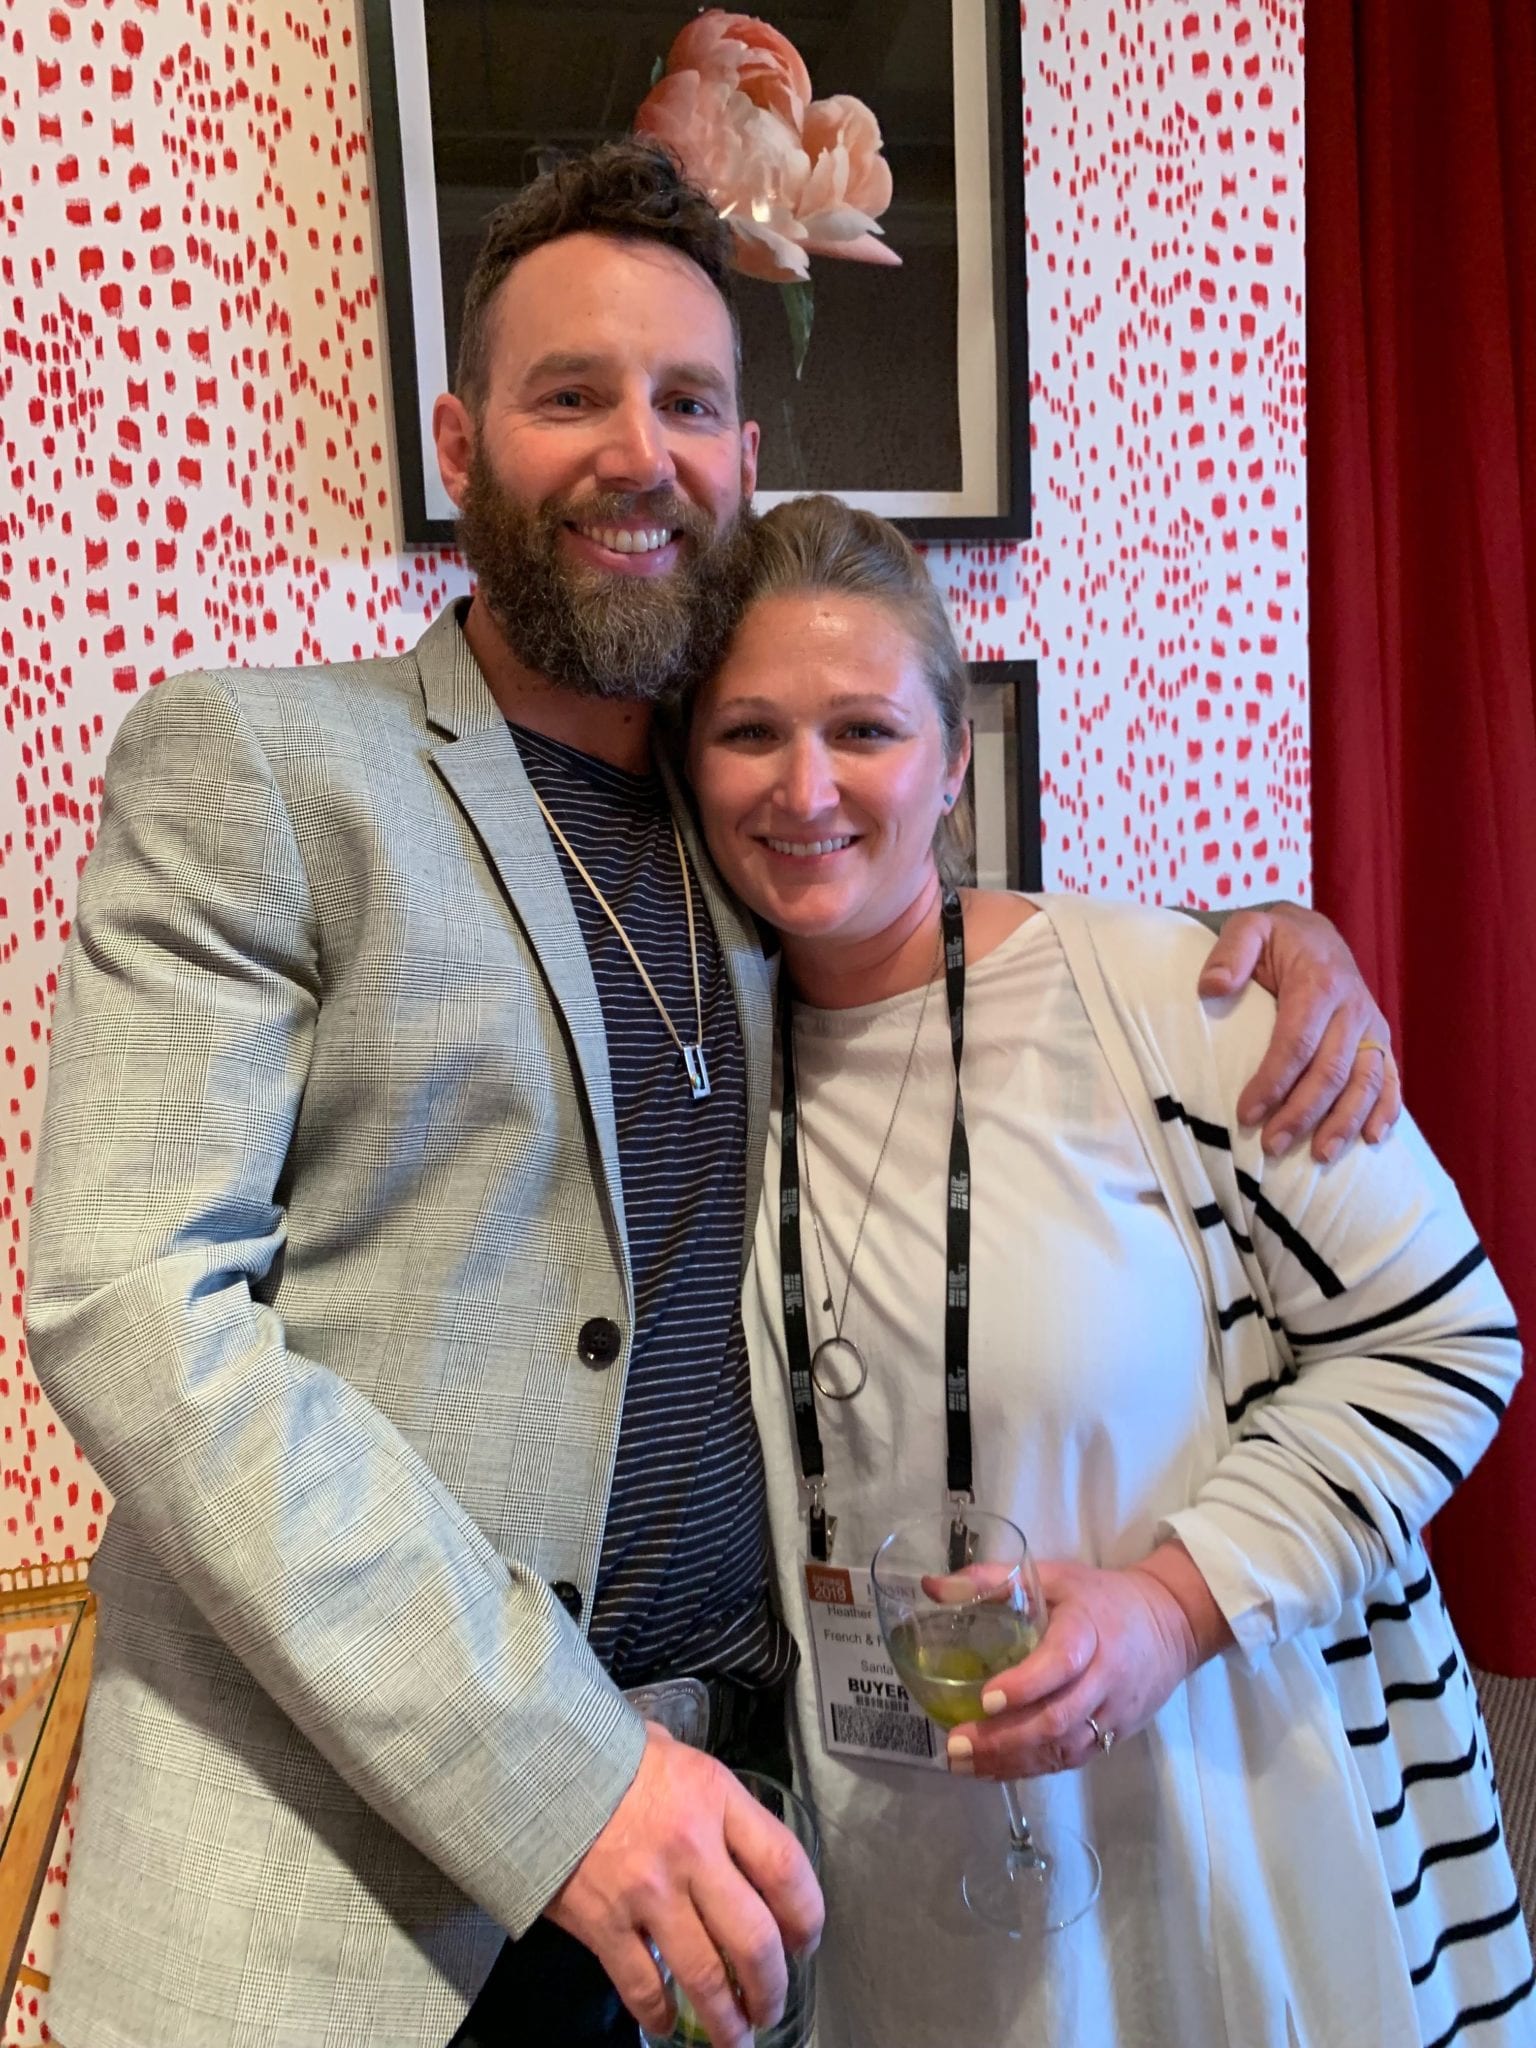 Matt and Heather French posing for a photograph in a room with red spotted wallpaper and framed artwork of a rose